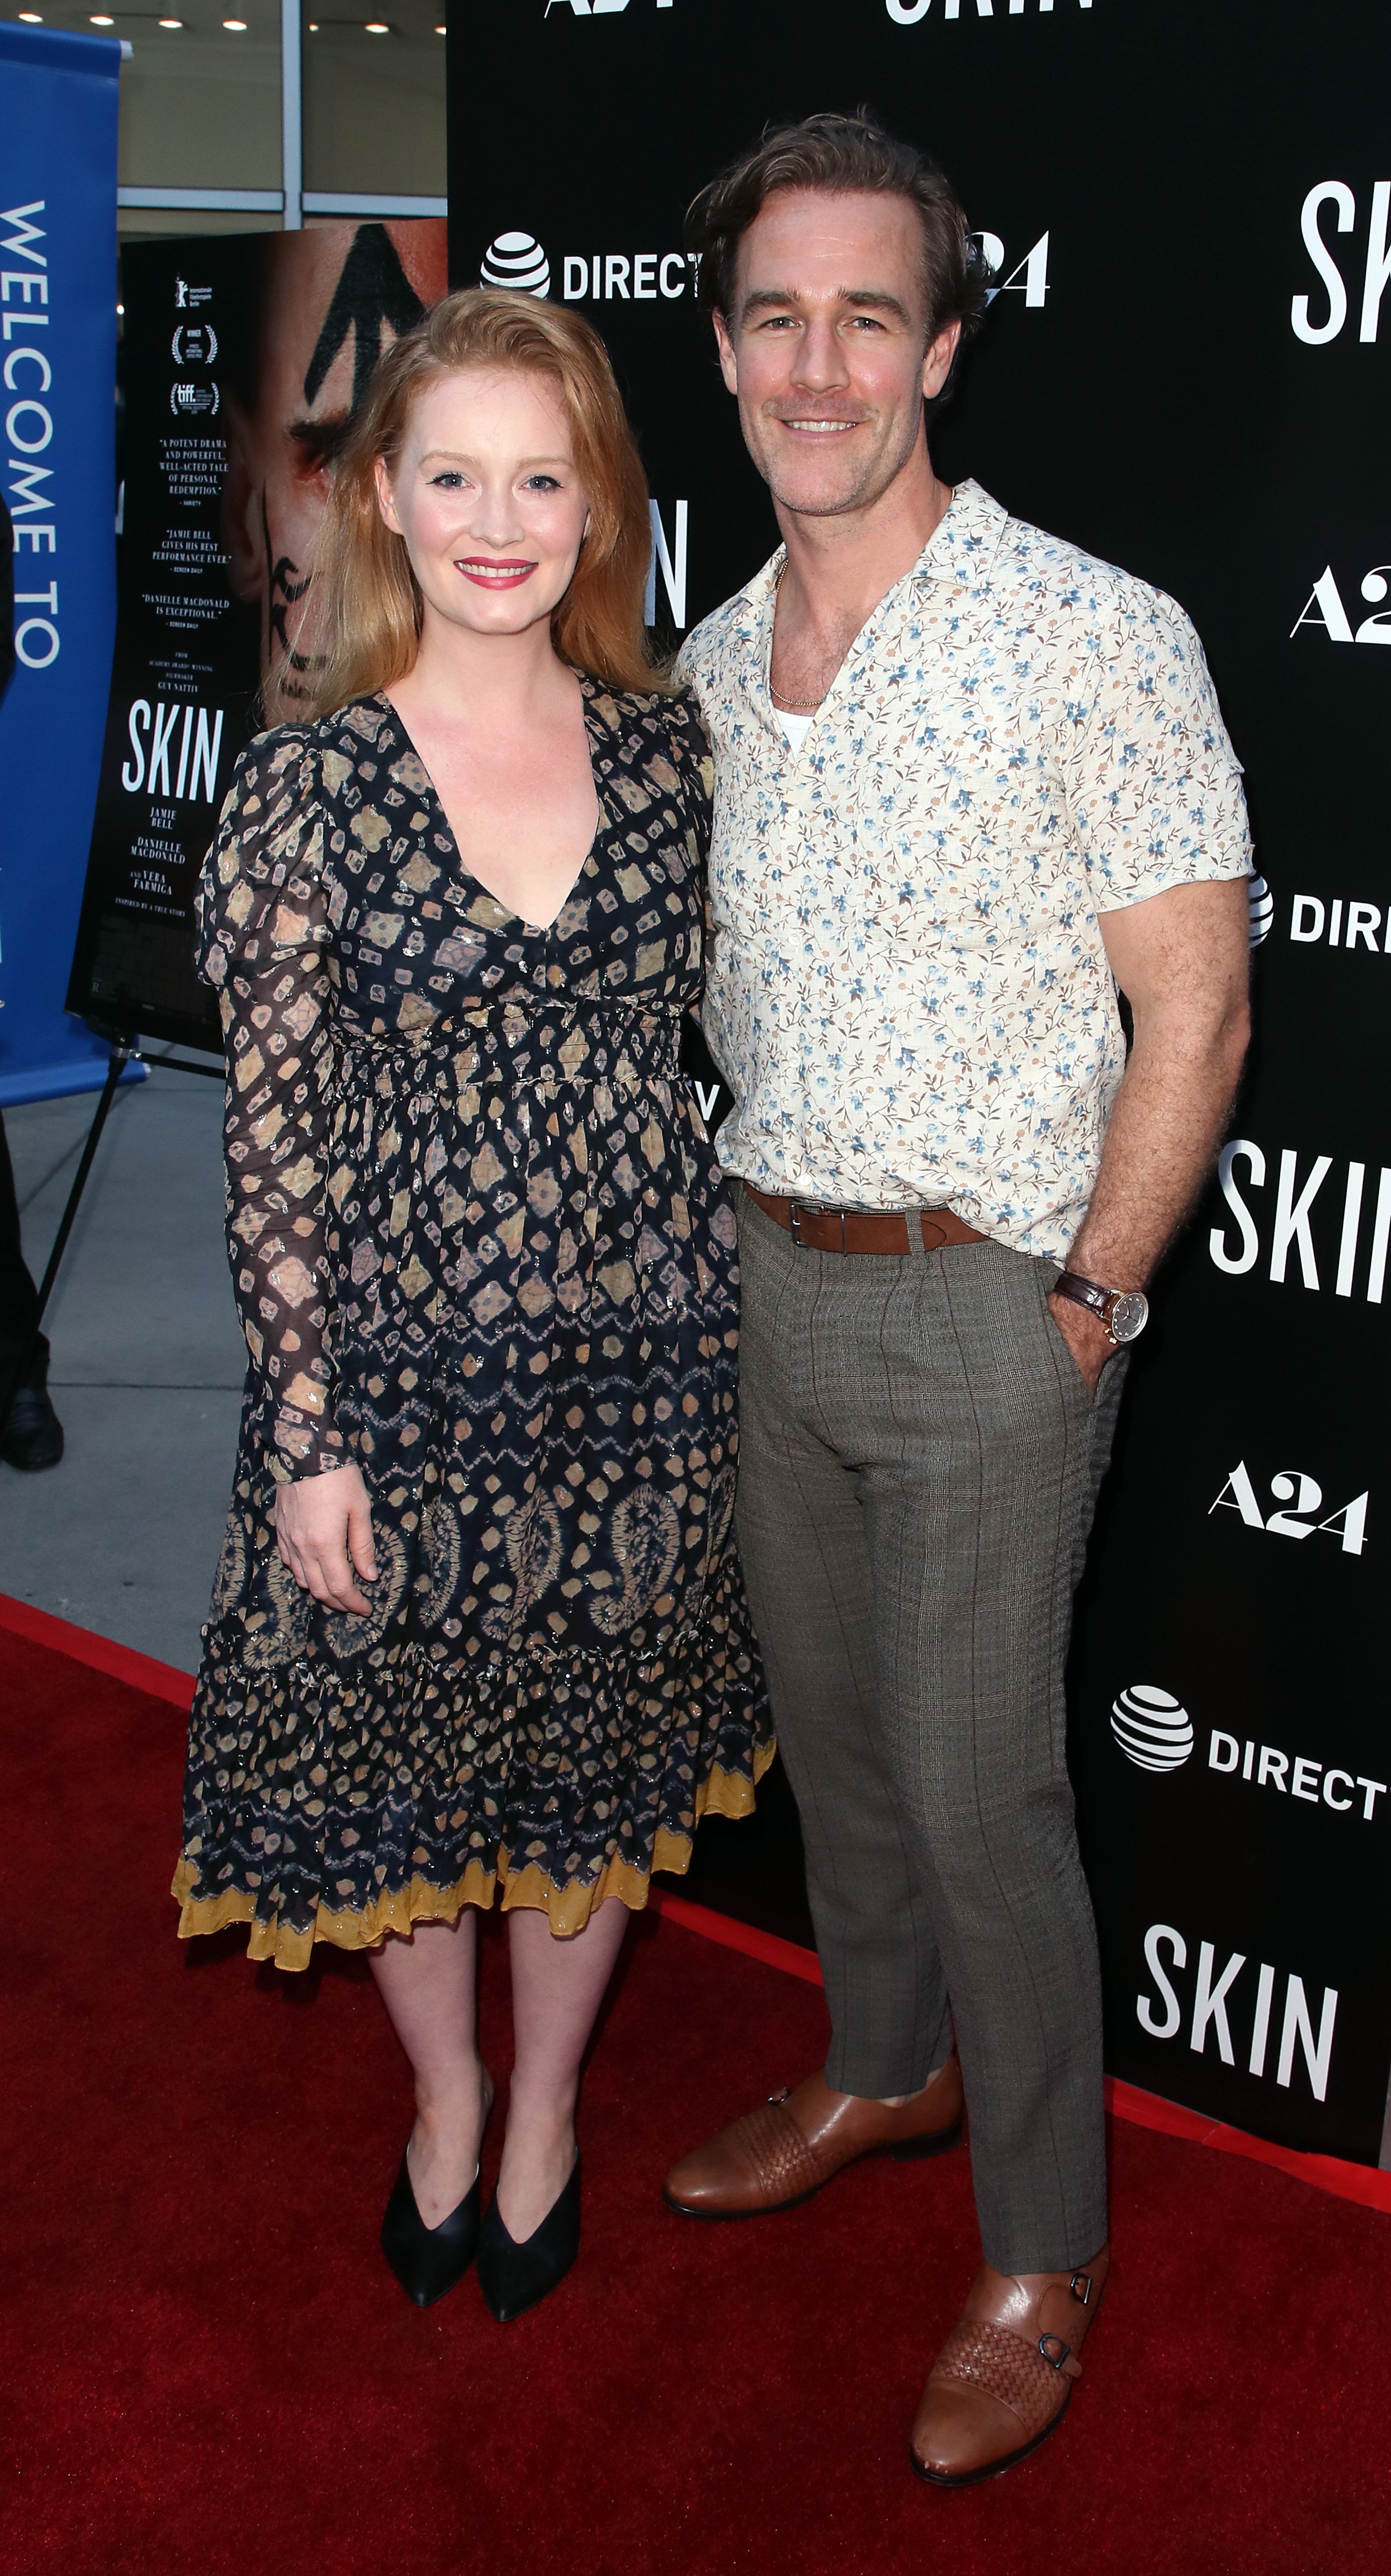 Kimberly Brook and James Van Der Beek attending the LA Special Screening of A24's "Skin" at ArcLight Hollywood | Source: Getty Images